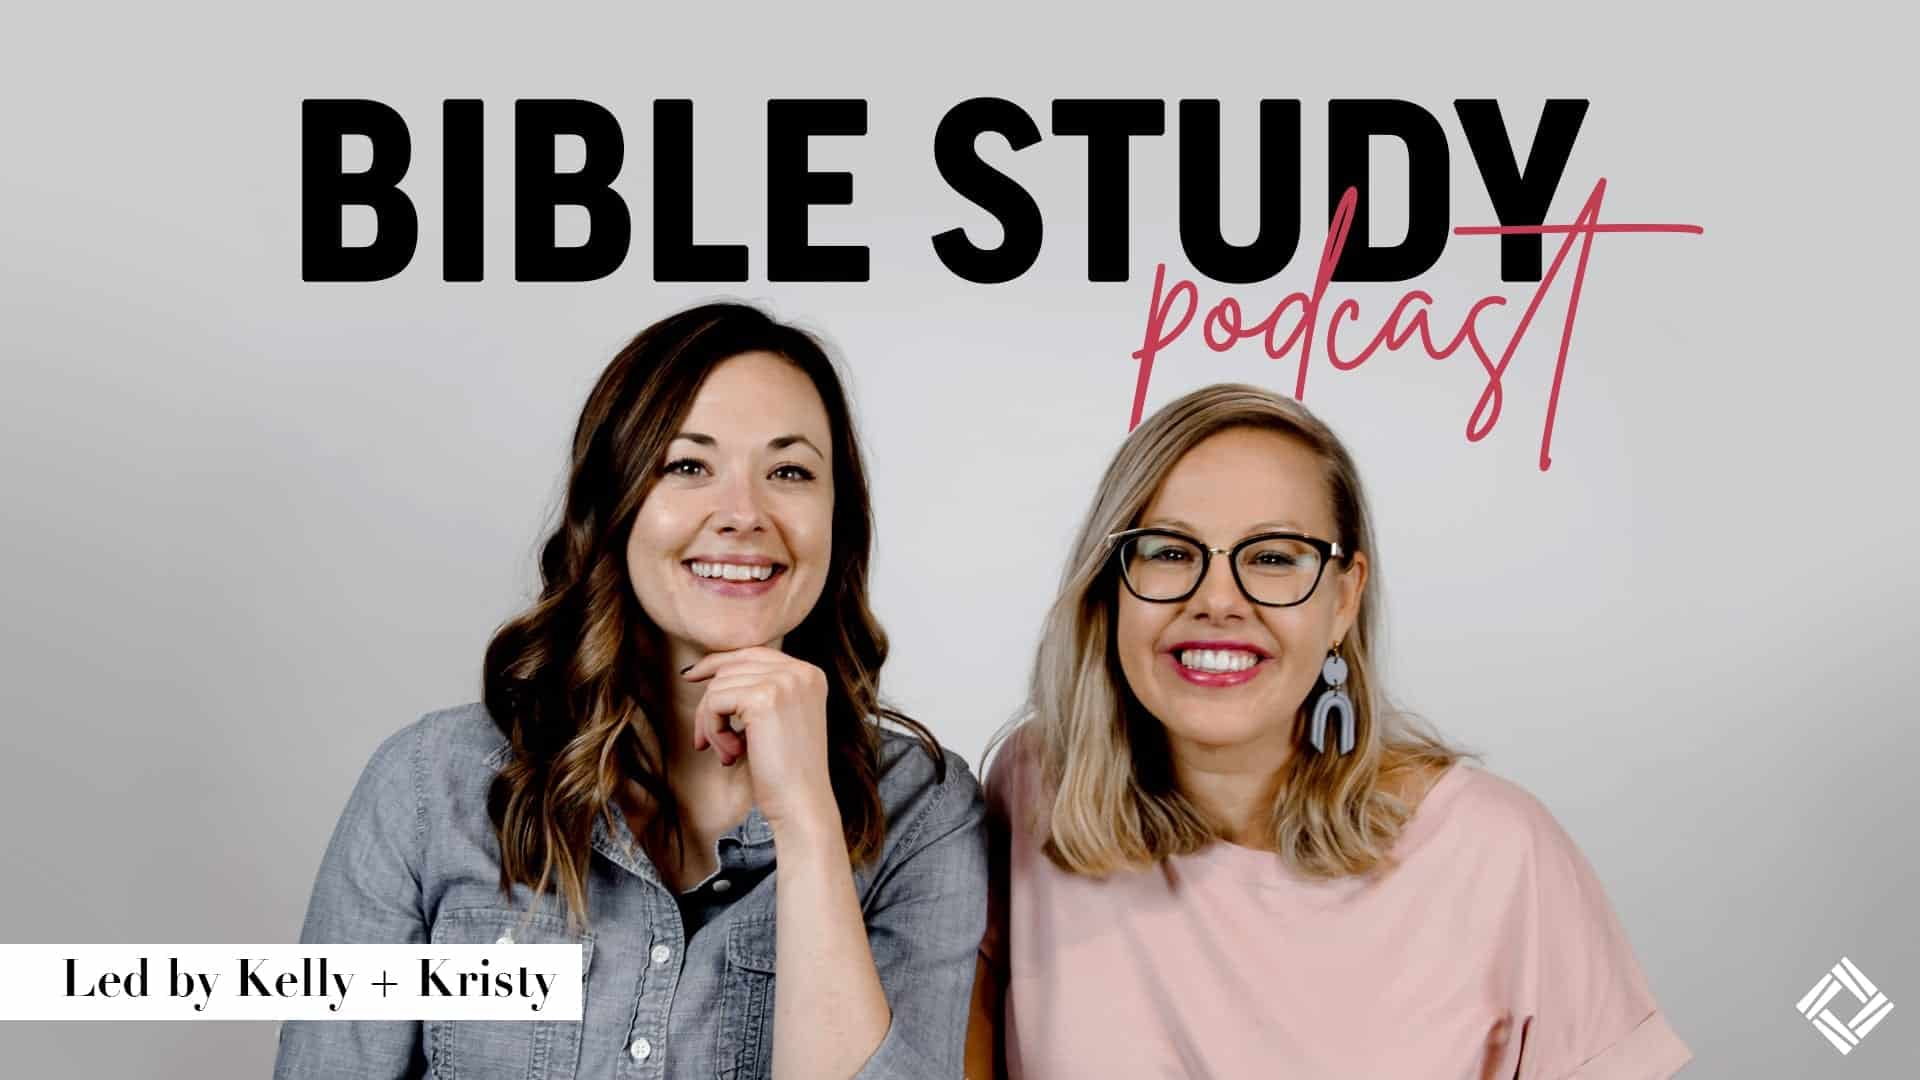 bible in a year podcast